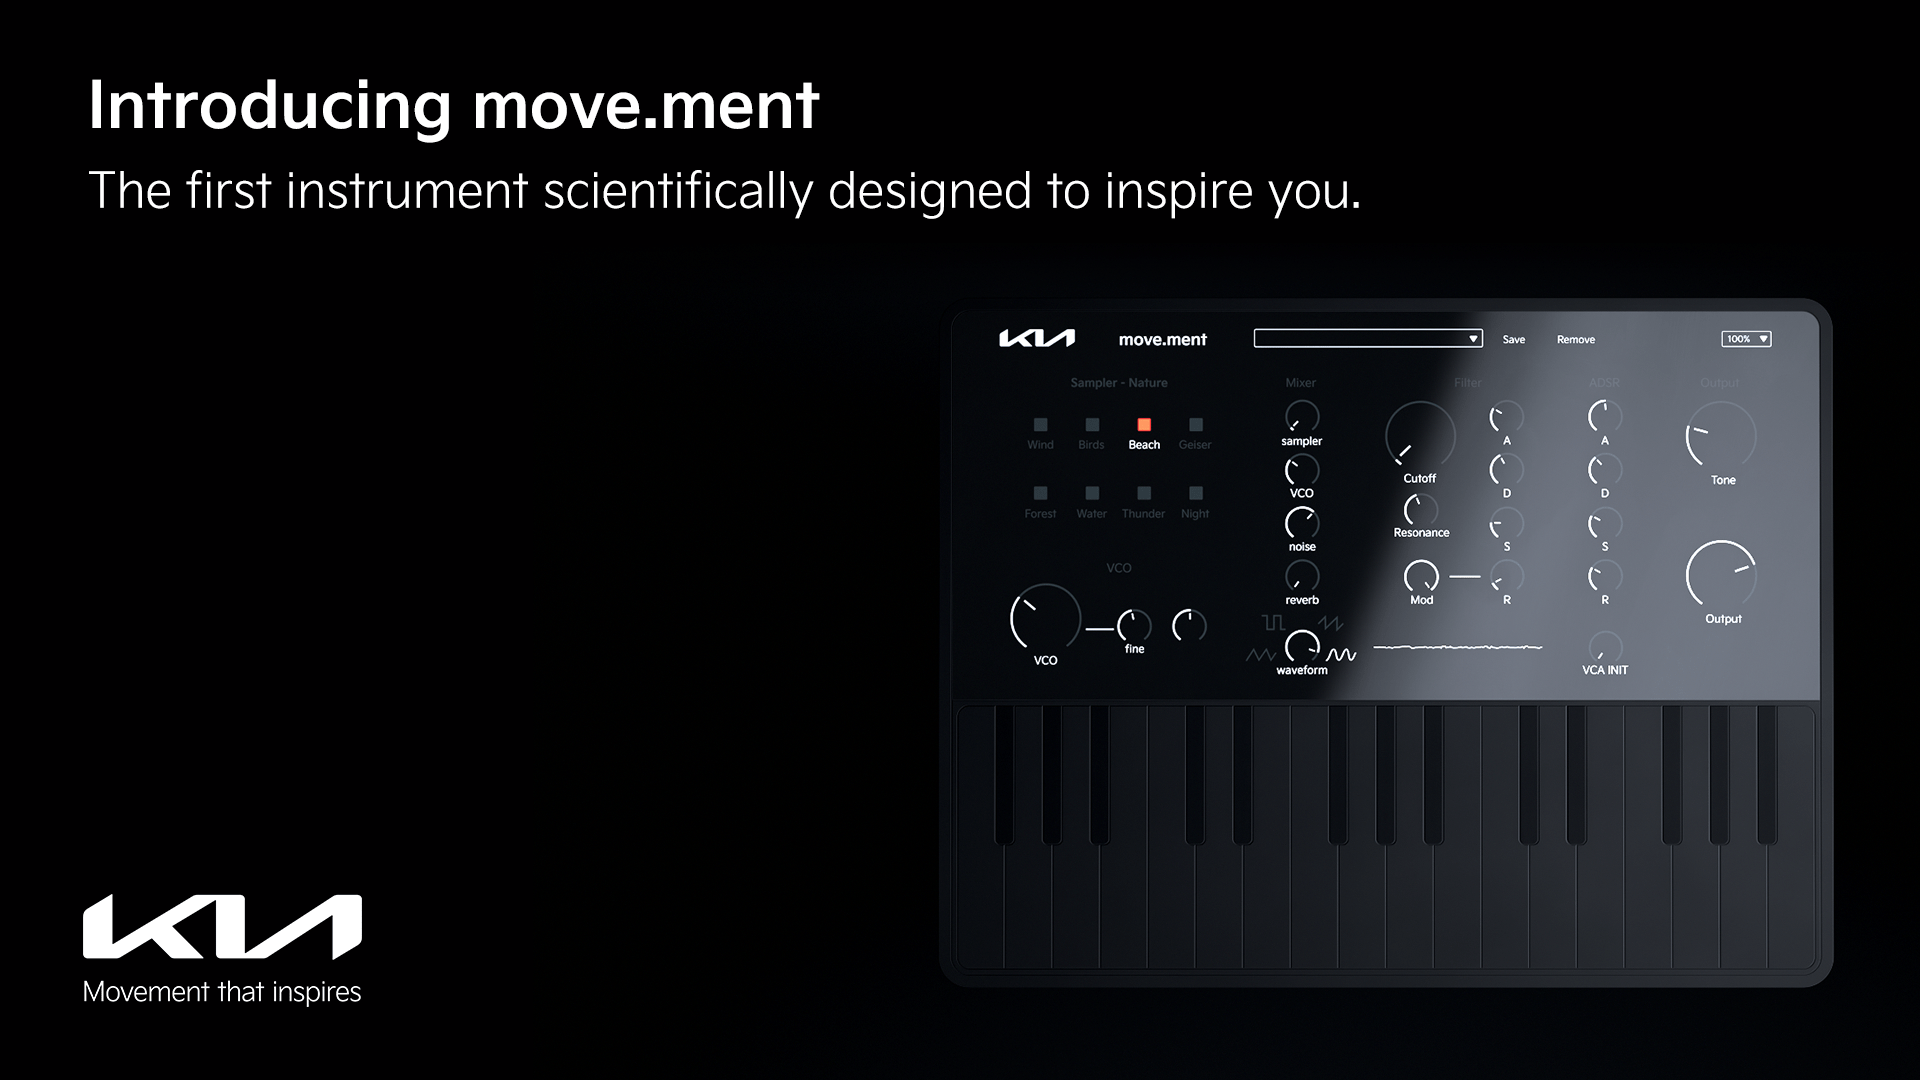 Kia releases 'move.ment', the first instrument designed to inspire you